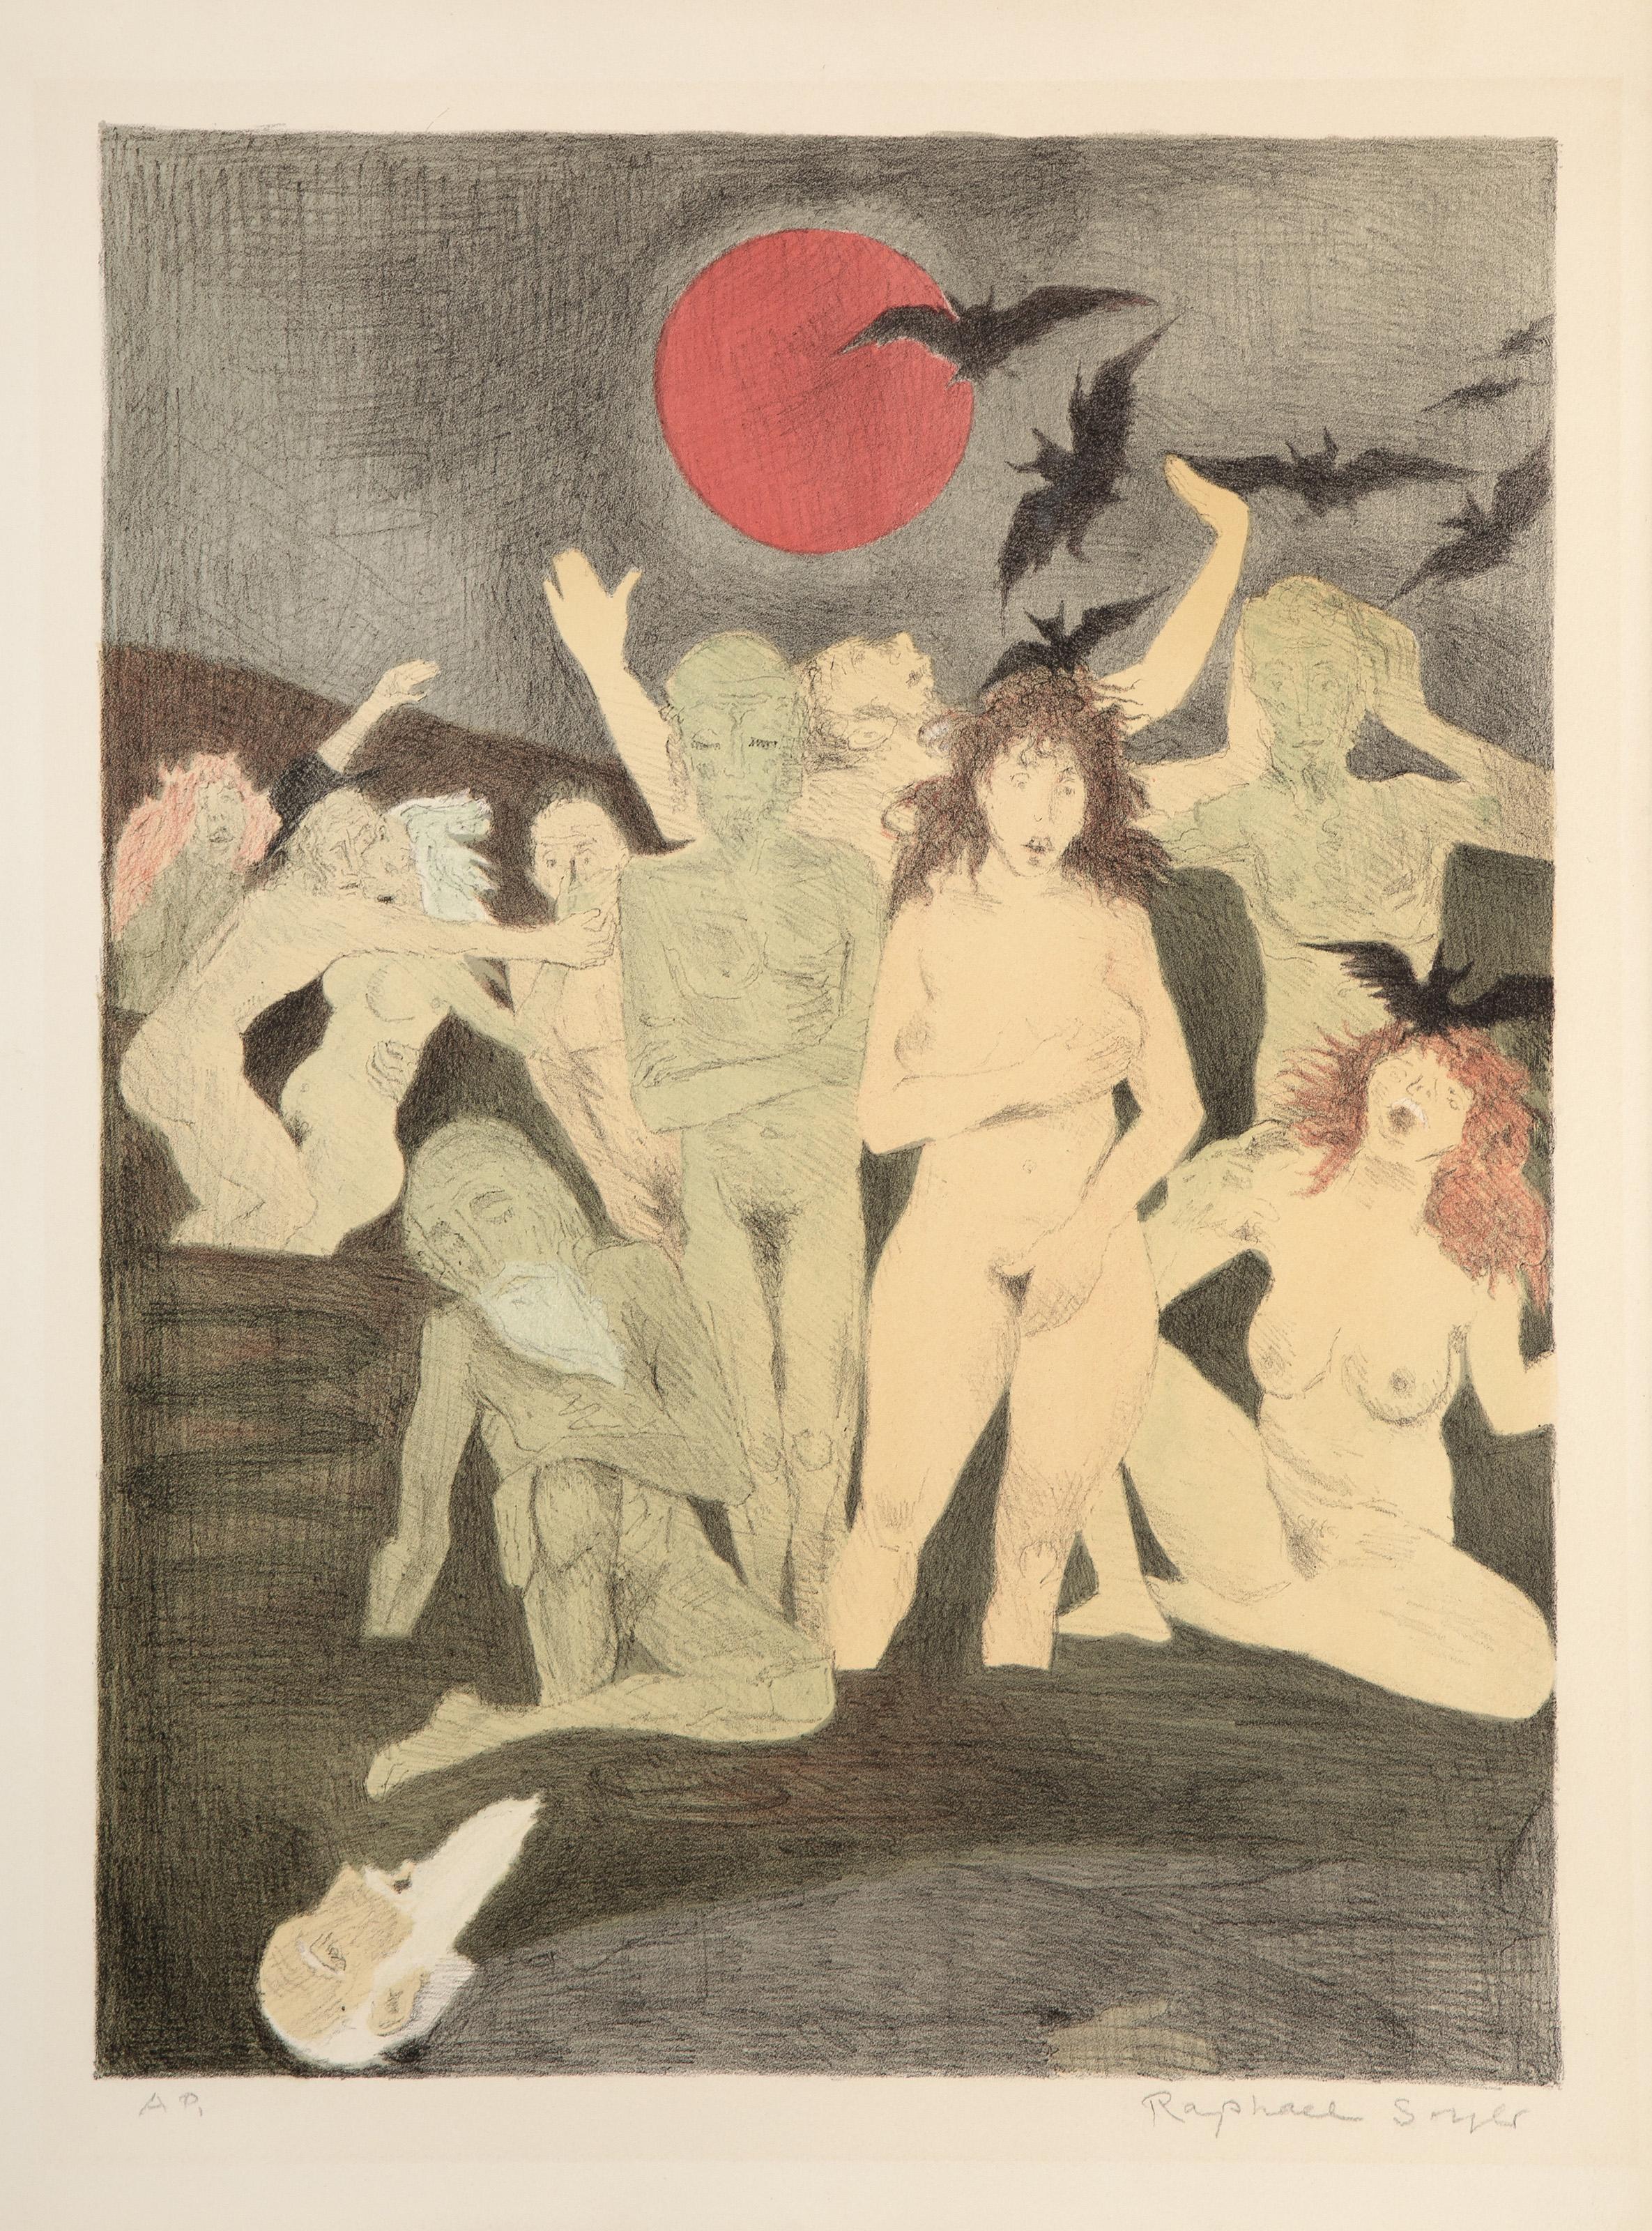 Raphael Soyer, Russian/American (1899 - 1987) -  Nude in the Moon Light. Year: 1970, Medium: Lithograph, signed and numbered in pencil, Edition: AP, Image Size: 22.25 x 16.75 inches, Size: 26.5 x 19.75 in. (67.31 x 50.17 cm), Publisher: Touchstone